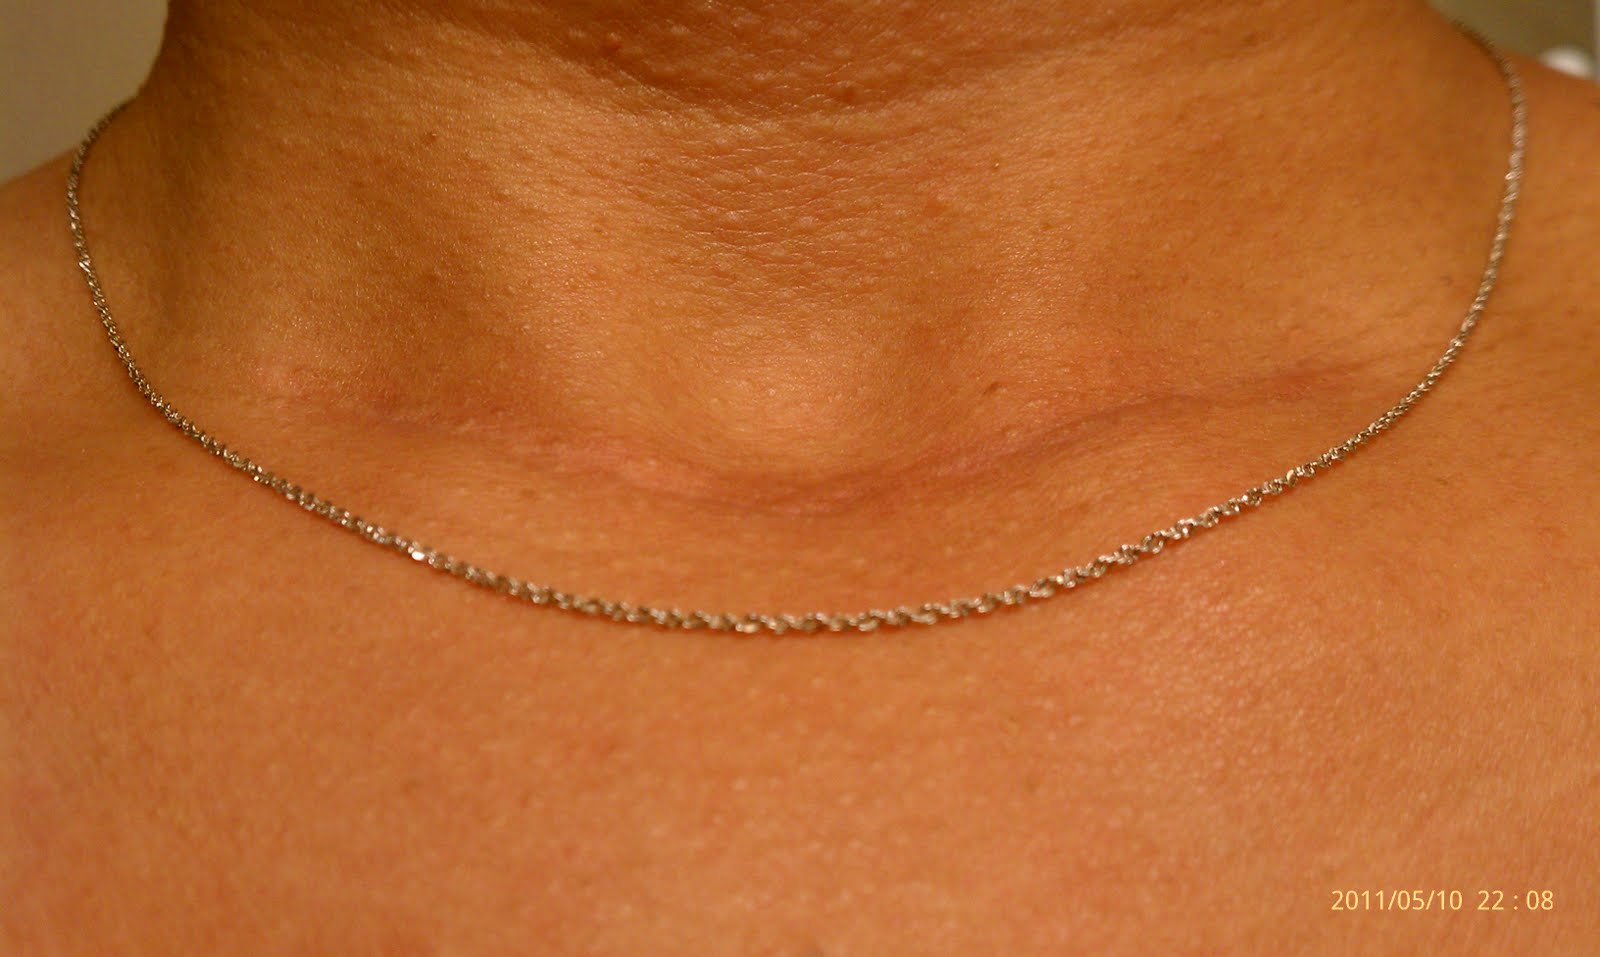 How Does My Neck Look May 2011